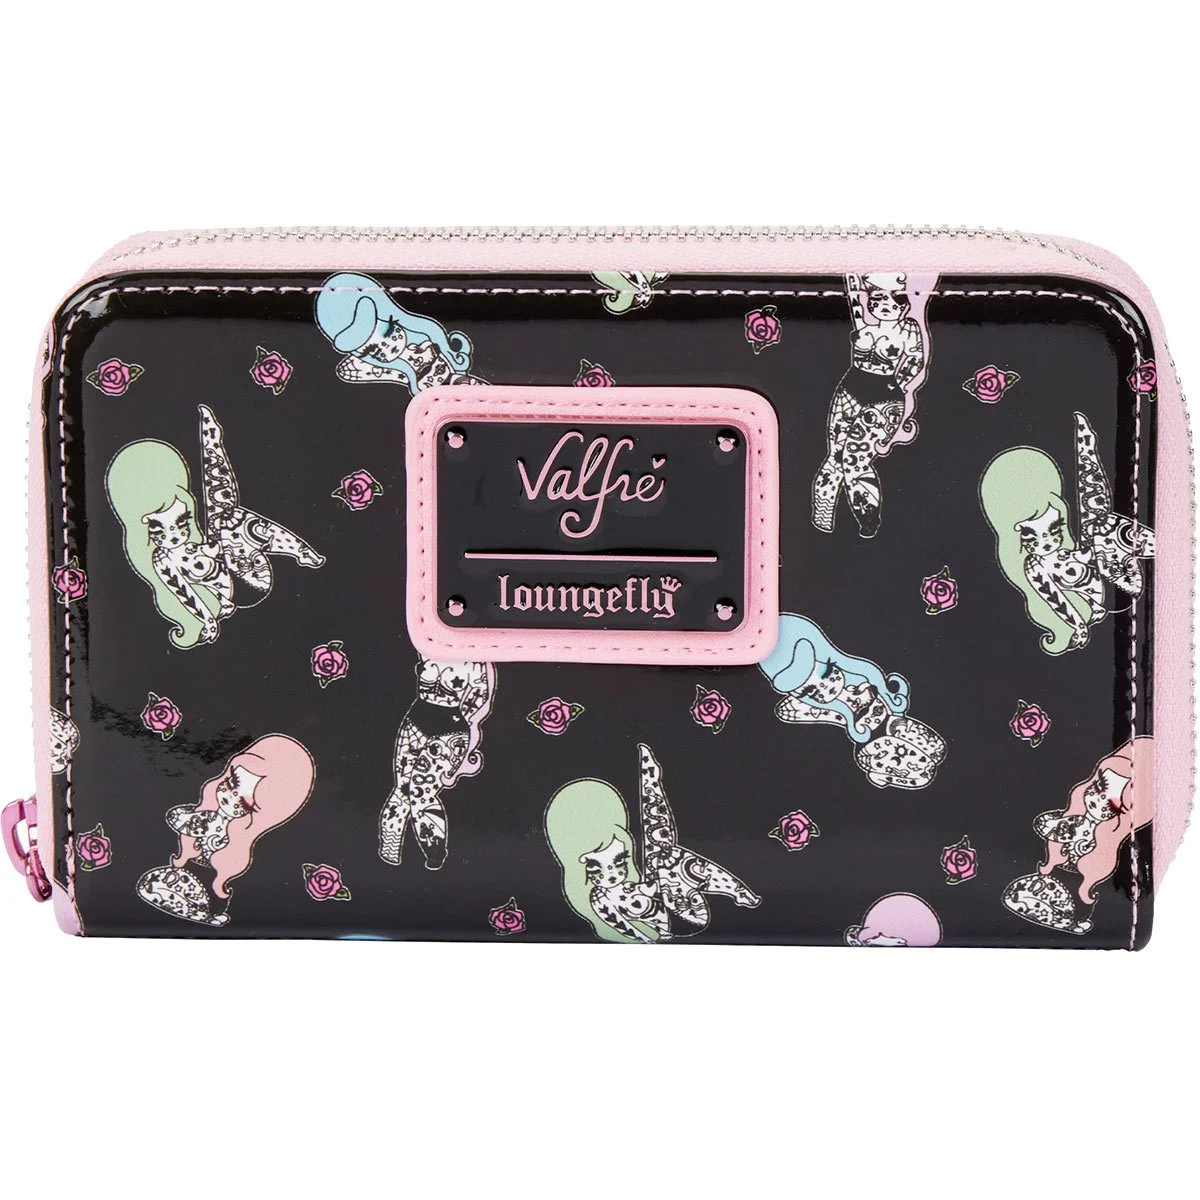 LOUNGEFLY VALFRE TATTOO ZIP WALLET